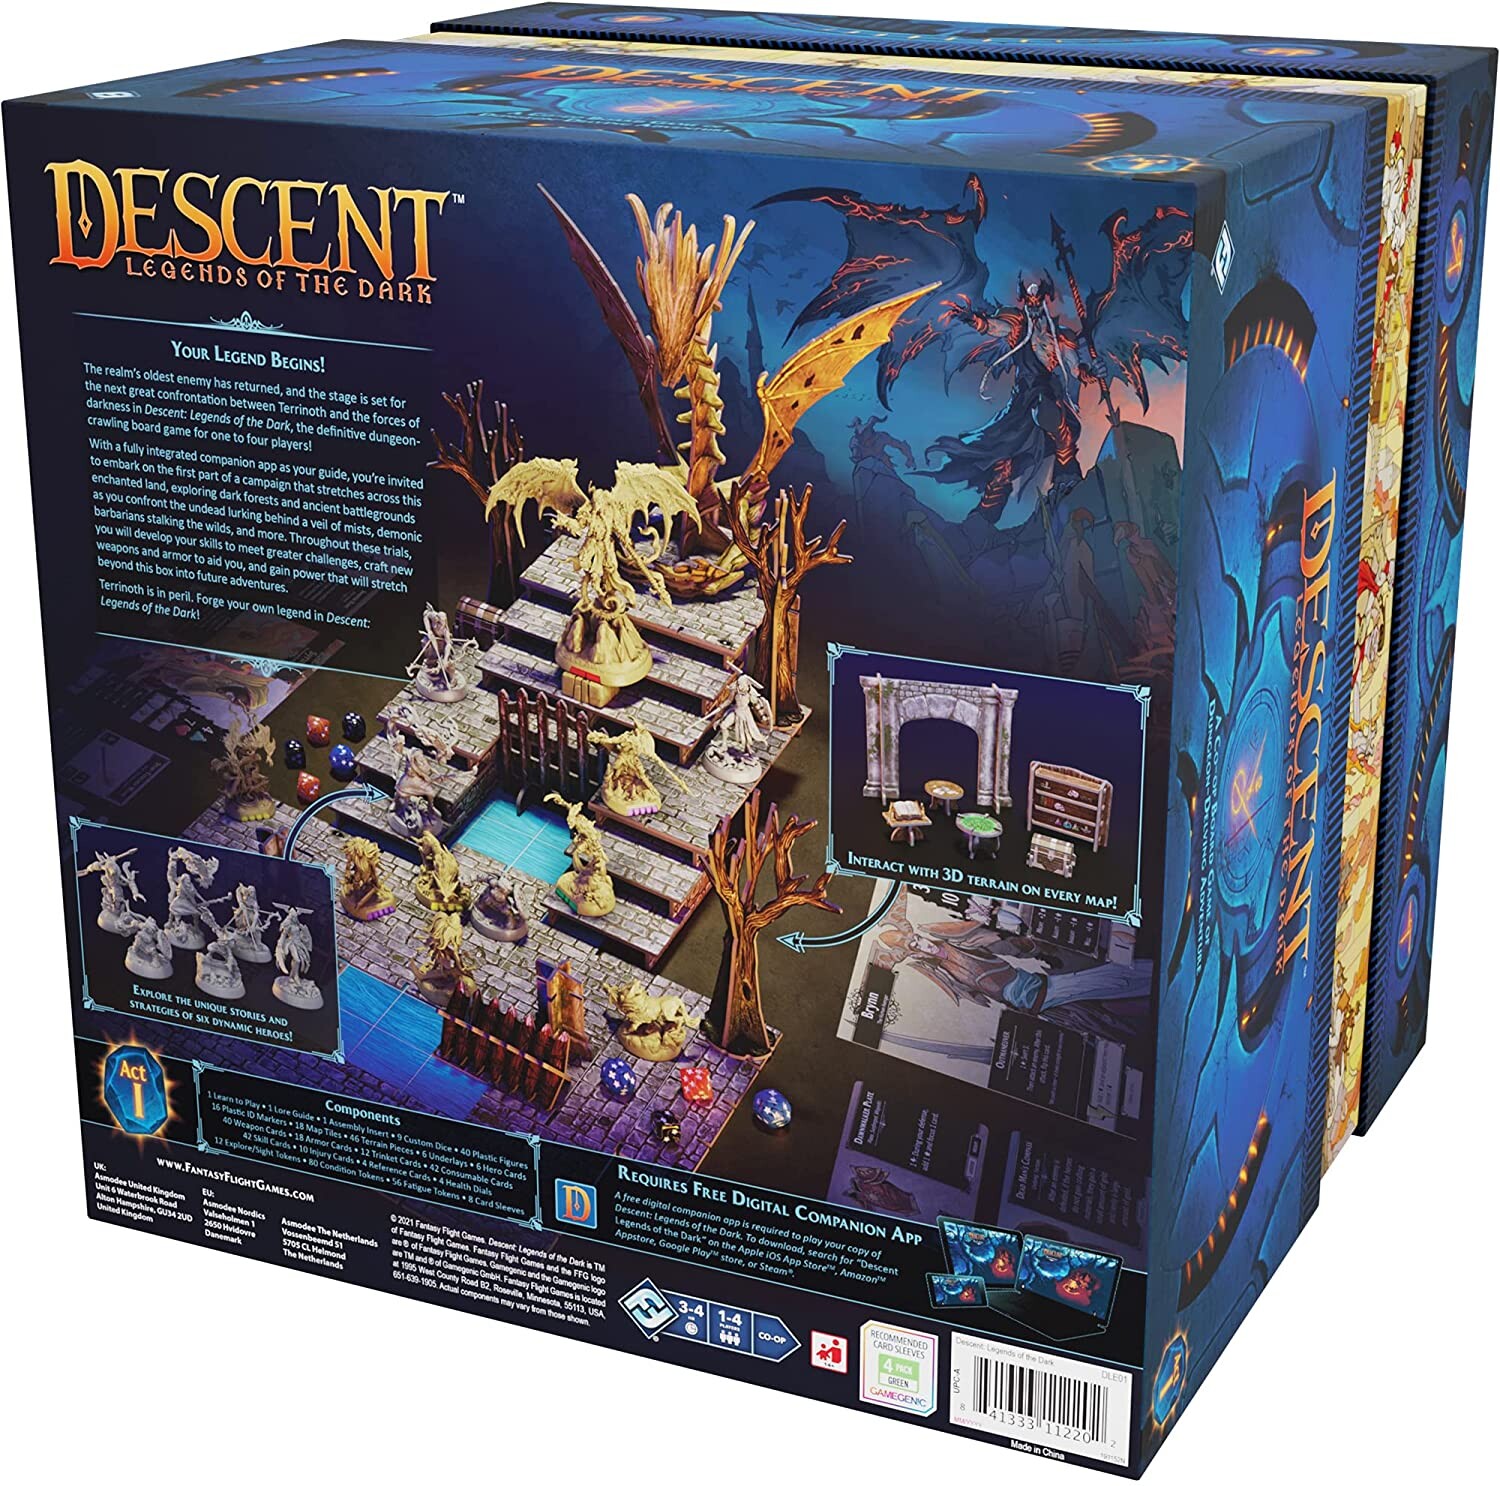 Beautiful image of the back of the Descent box designed by the amazing artists and graphic designers at FFG